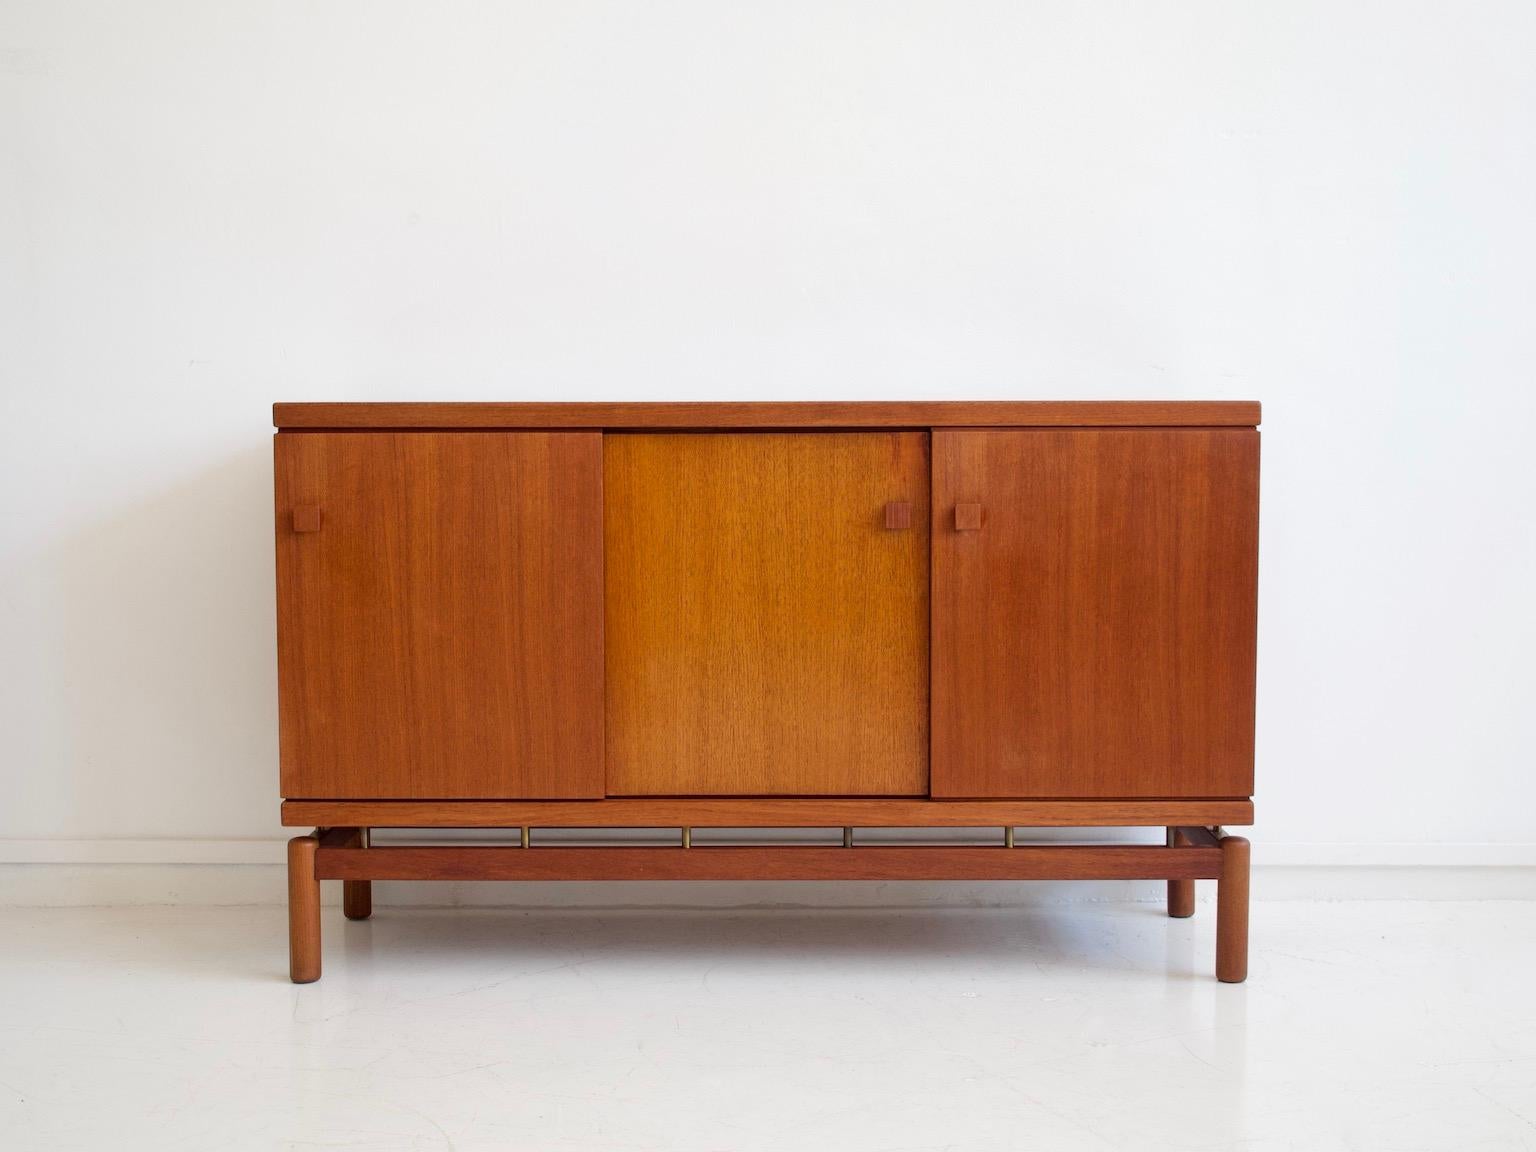 Sideboard made of teak wood with sliding doors and brass details. Manufactured and labeled by La Permanente Mobili Cantù.